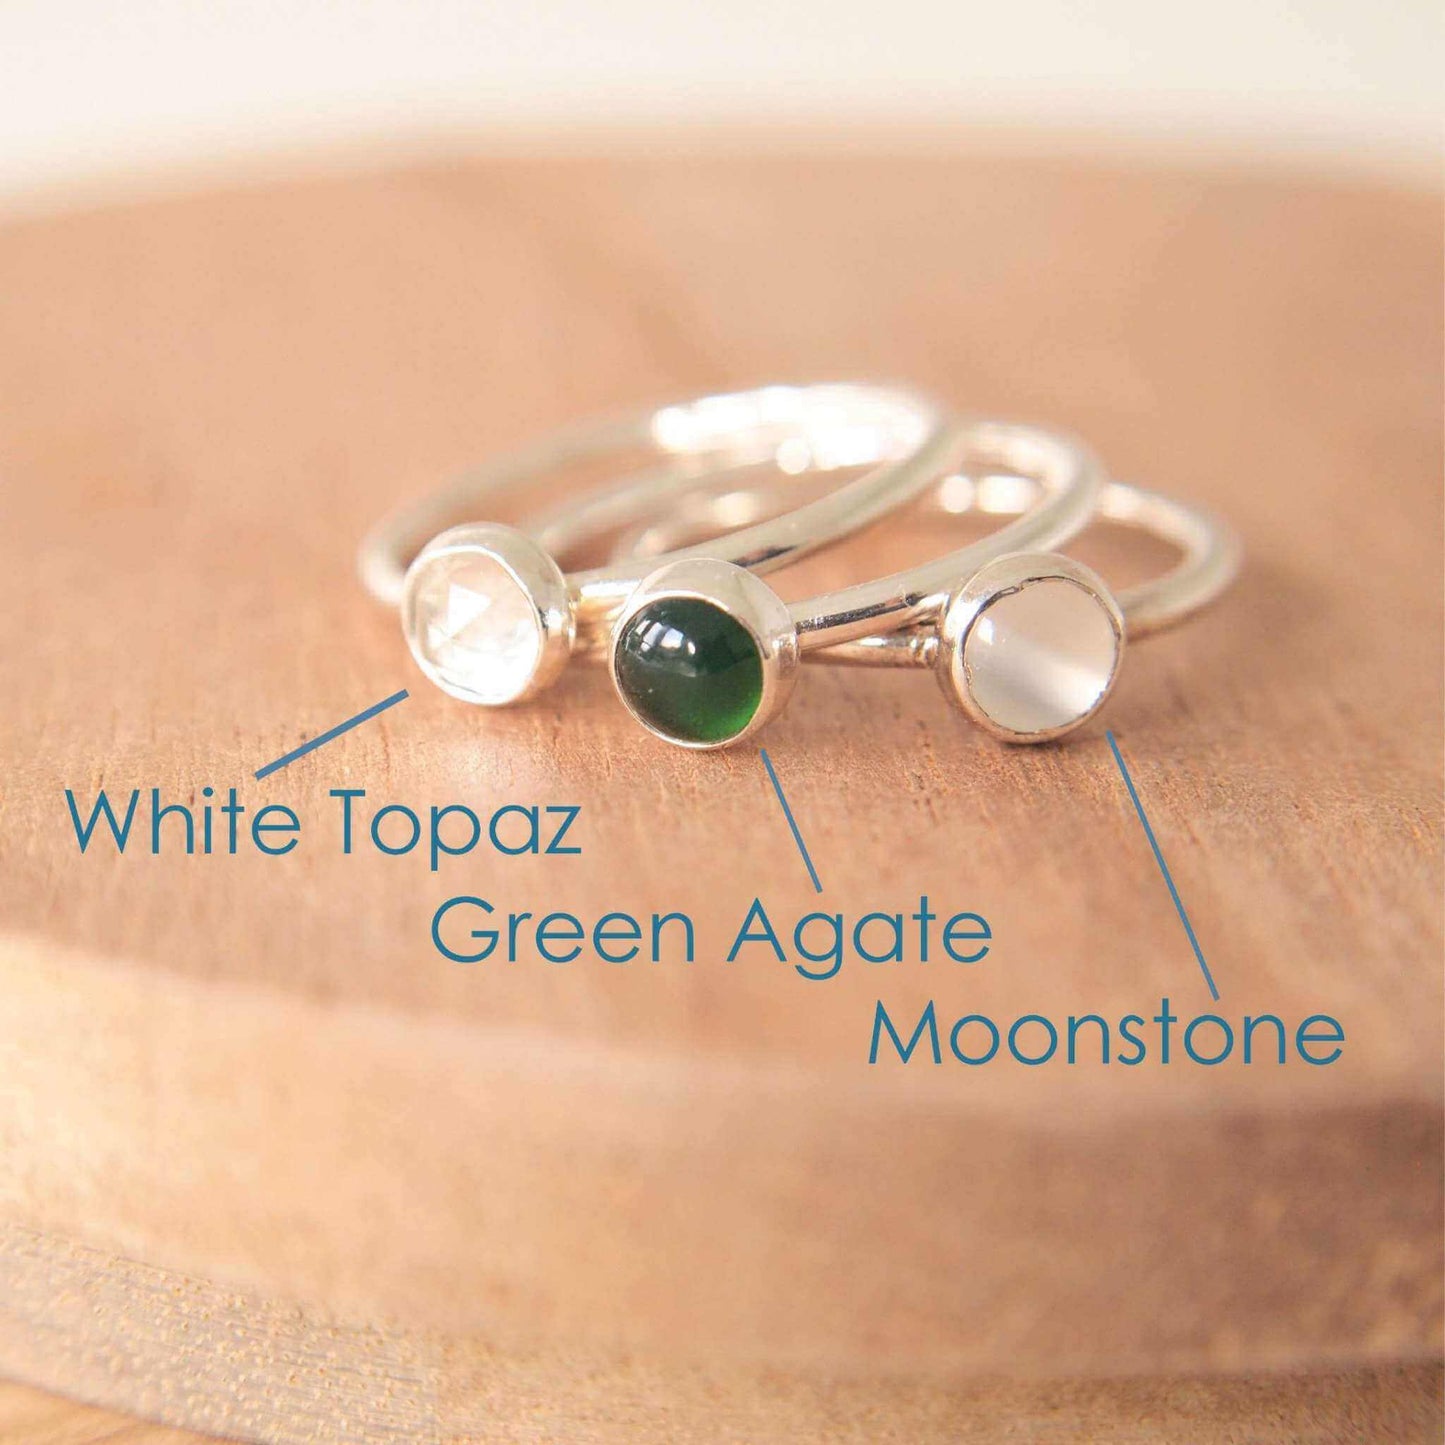 Three Silver rings, each set simply with a single gemstone in Green Agate, White Topaz and Moonstone in a round 5mm size. Birthstones for April, May and June. Handmade by Maram Jewellery in Edinburgh